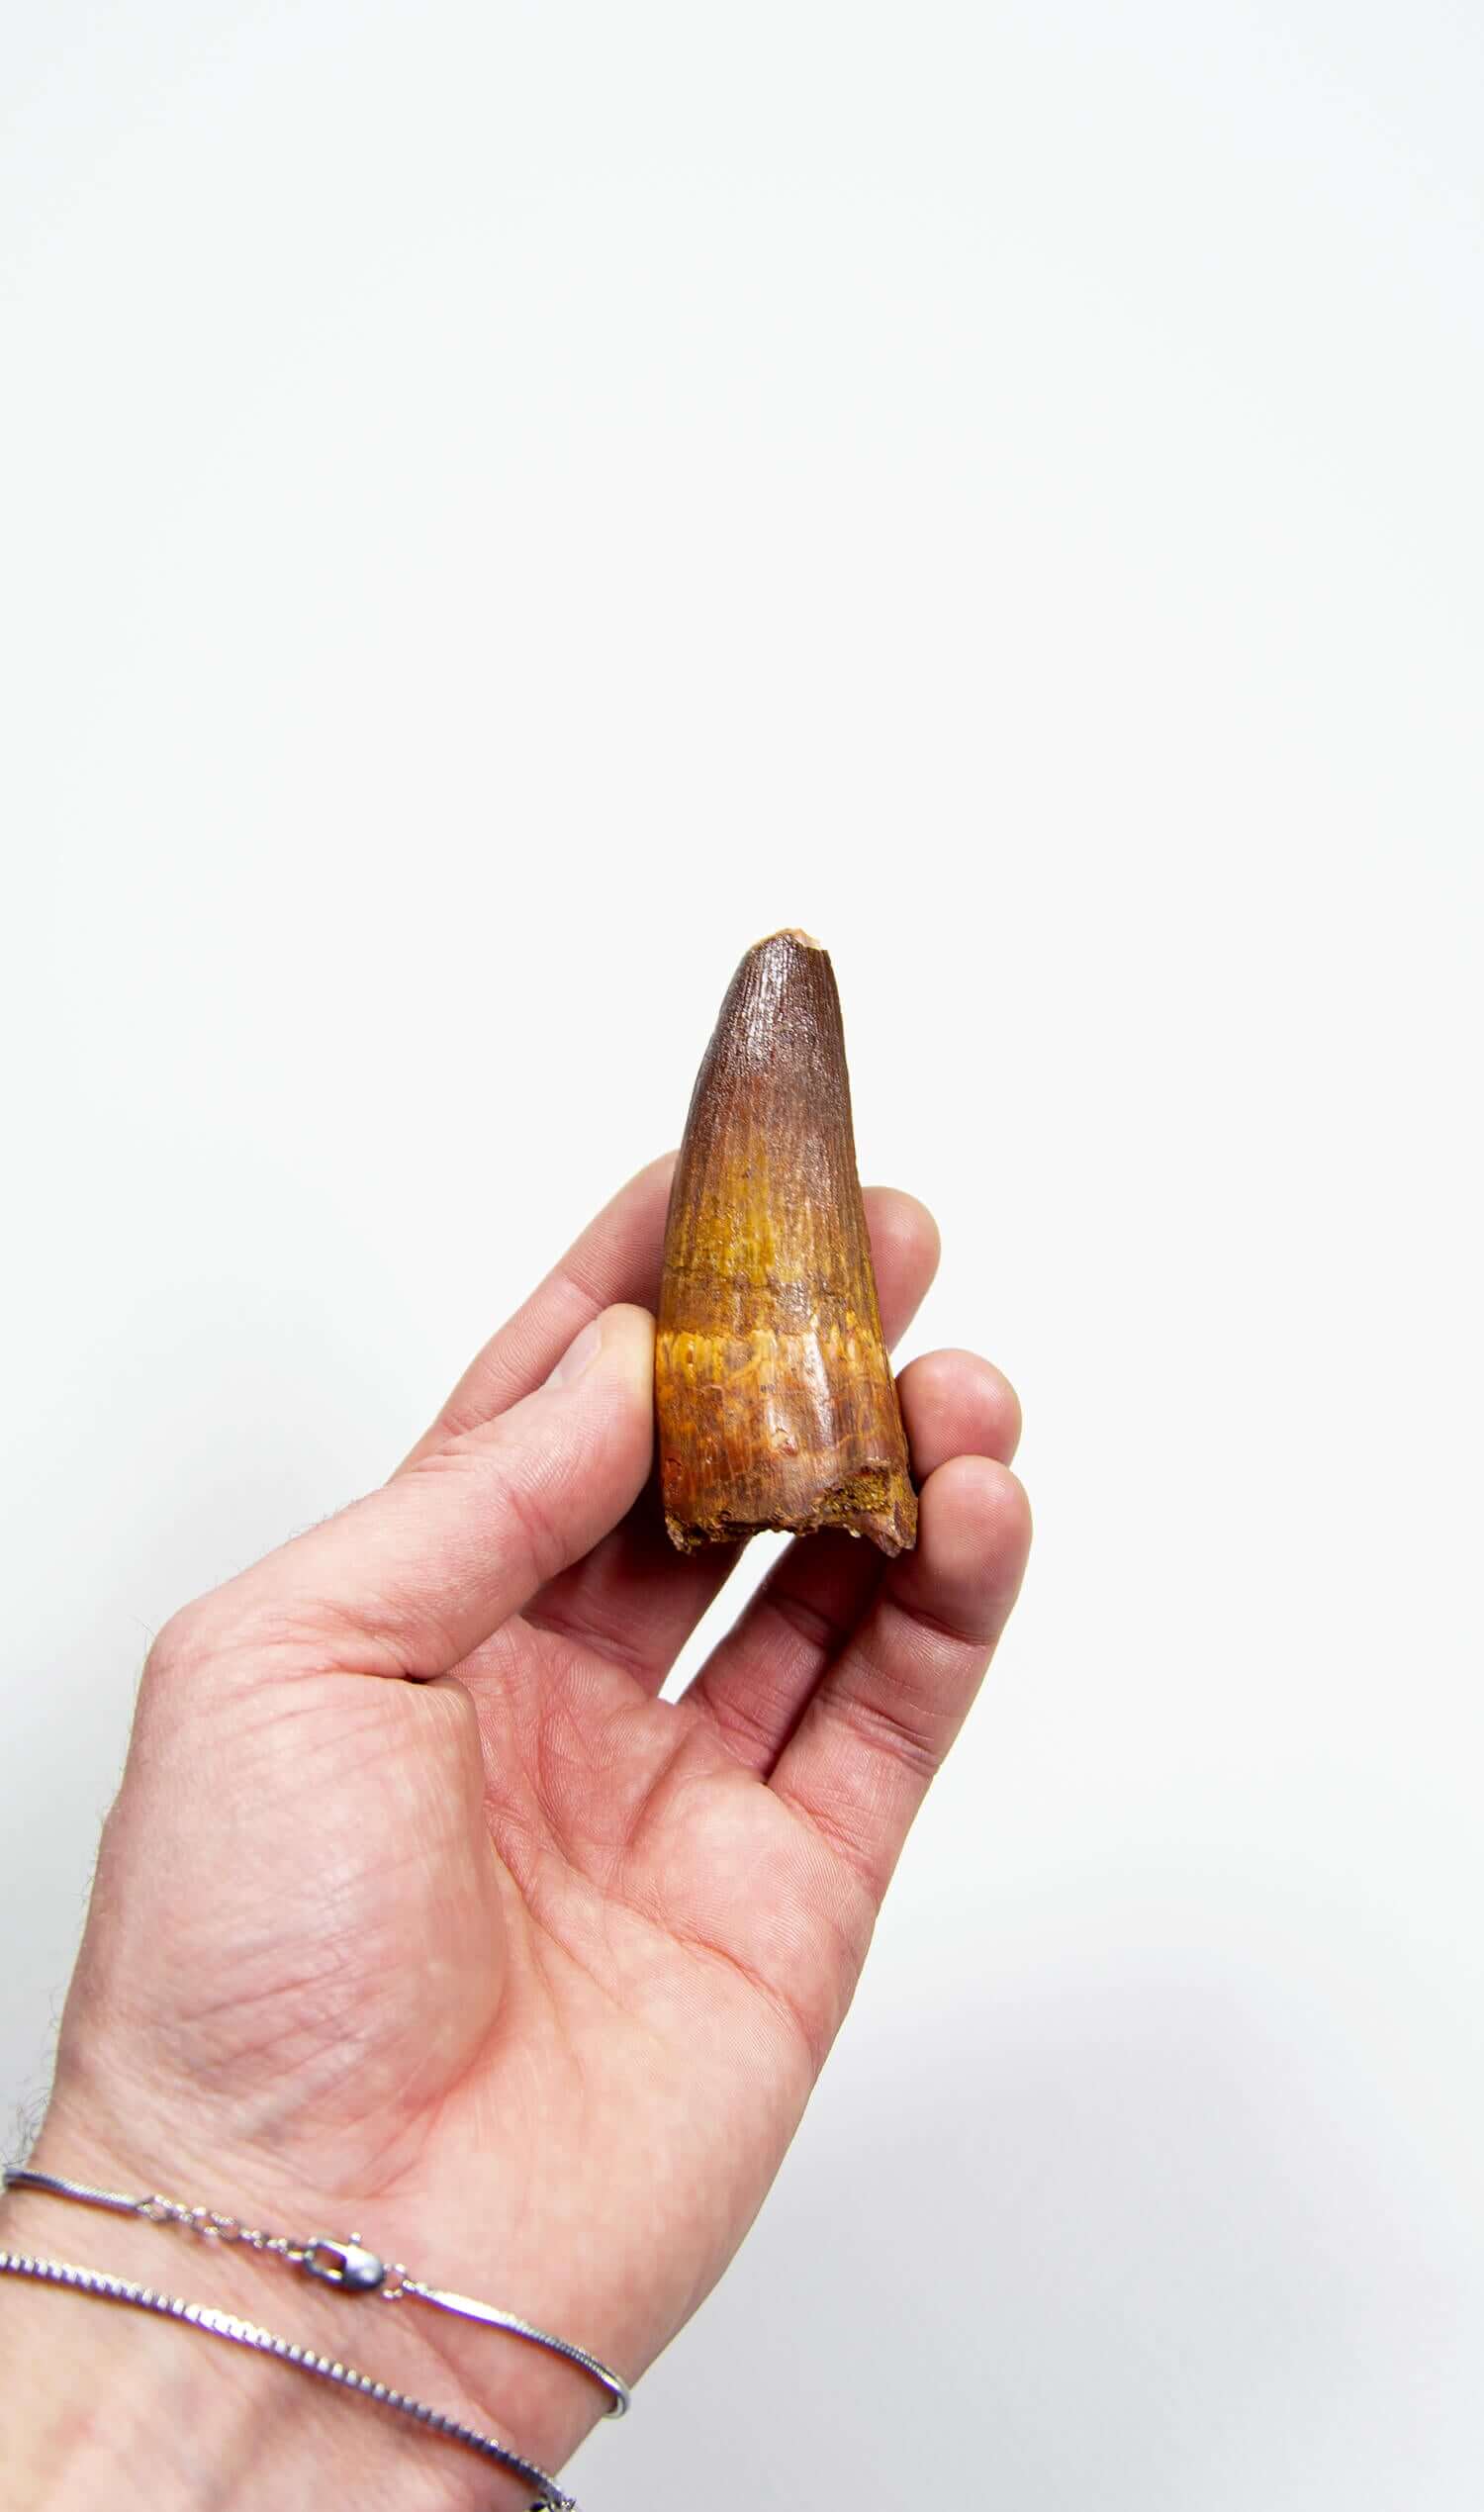 fossil dinosaur spinosaurus tooth for sale at the uk fossil store 92